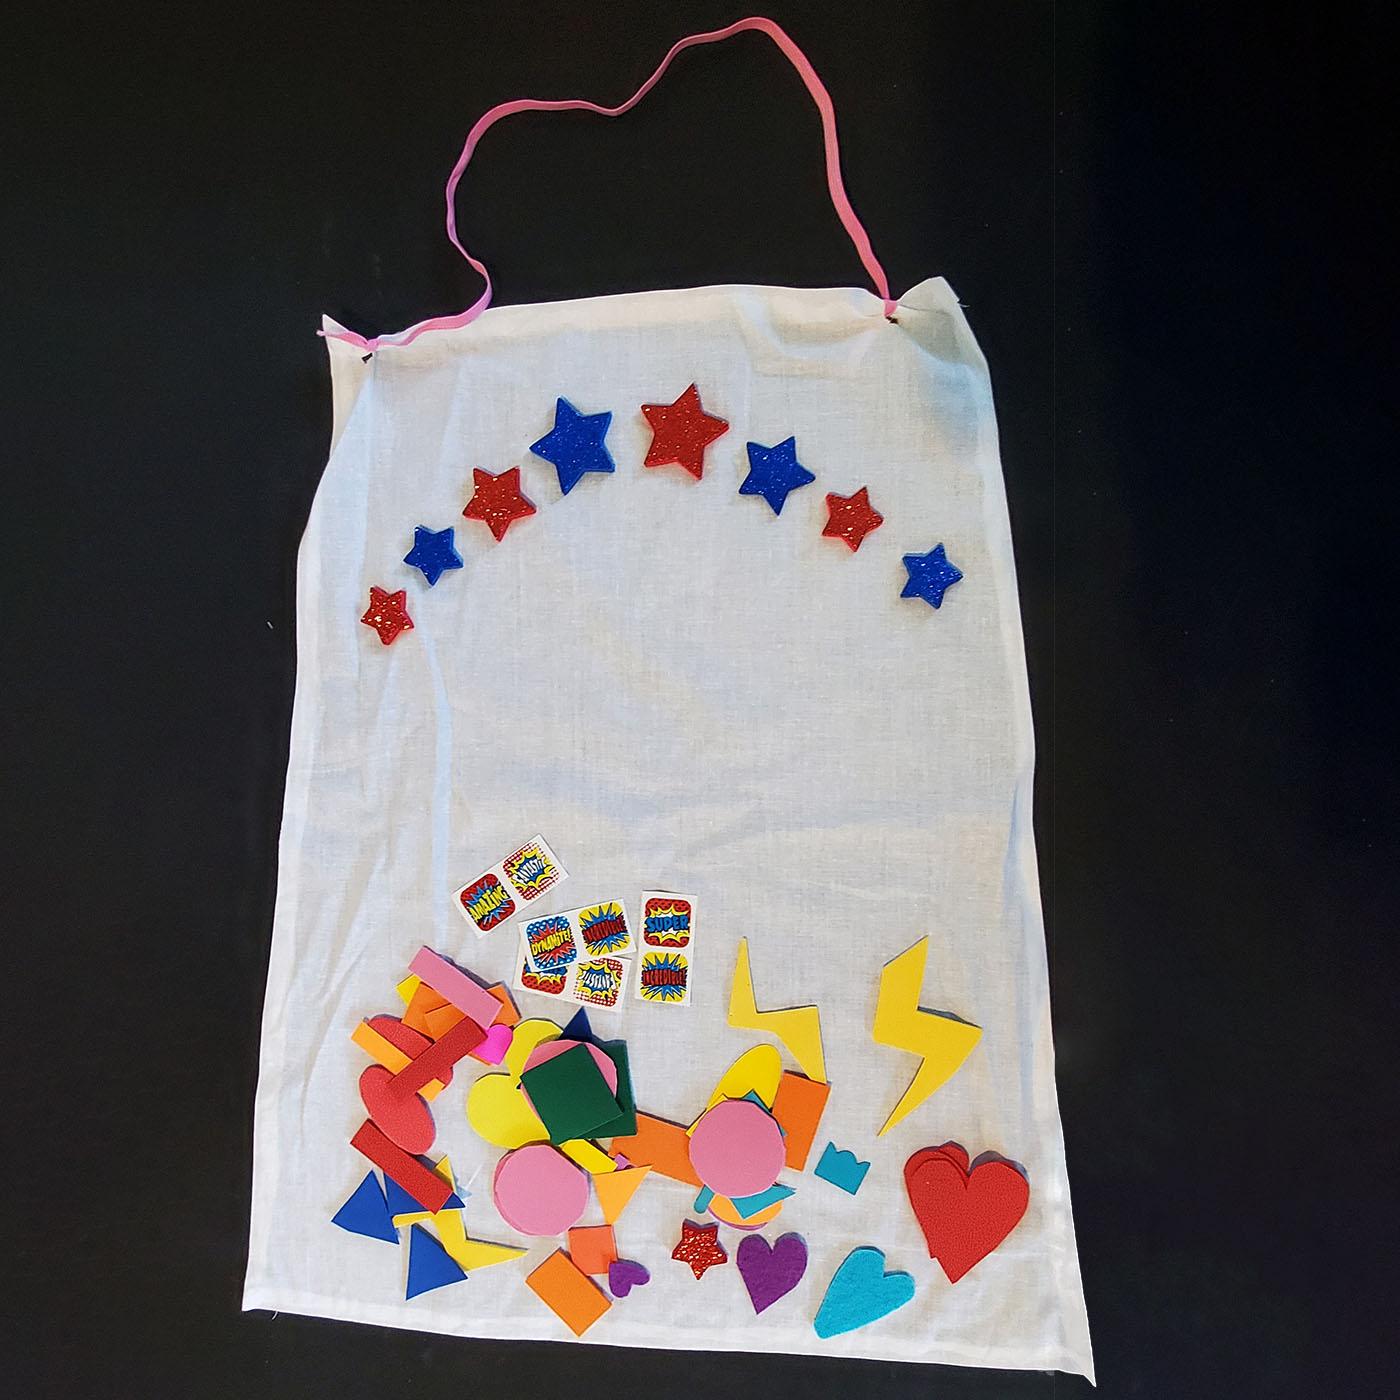 A piece of muslin fabric in the form of a cape with shapes and stickers on top